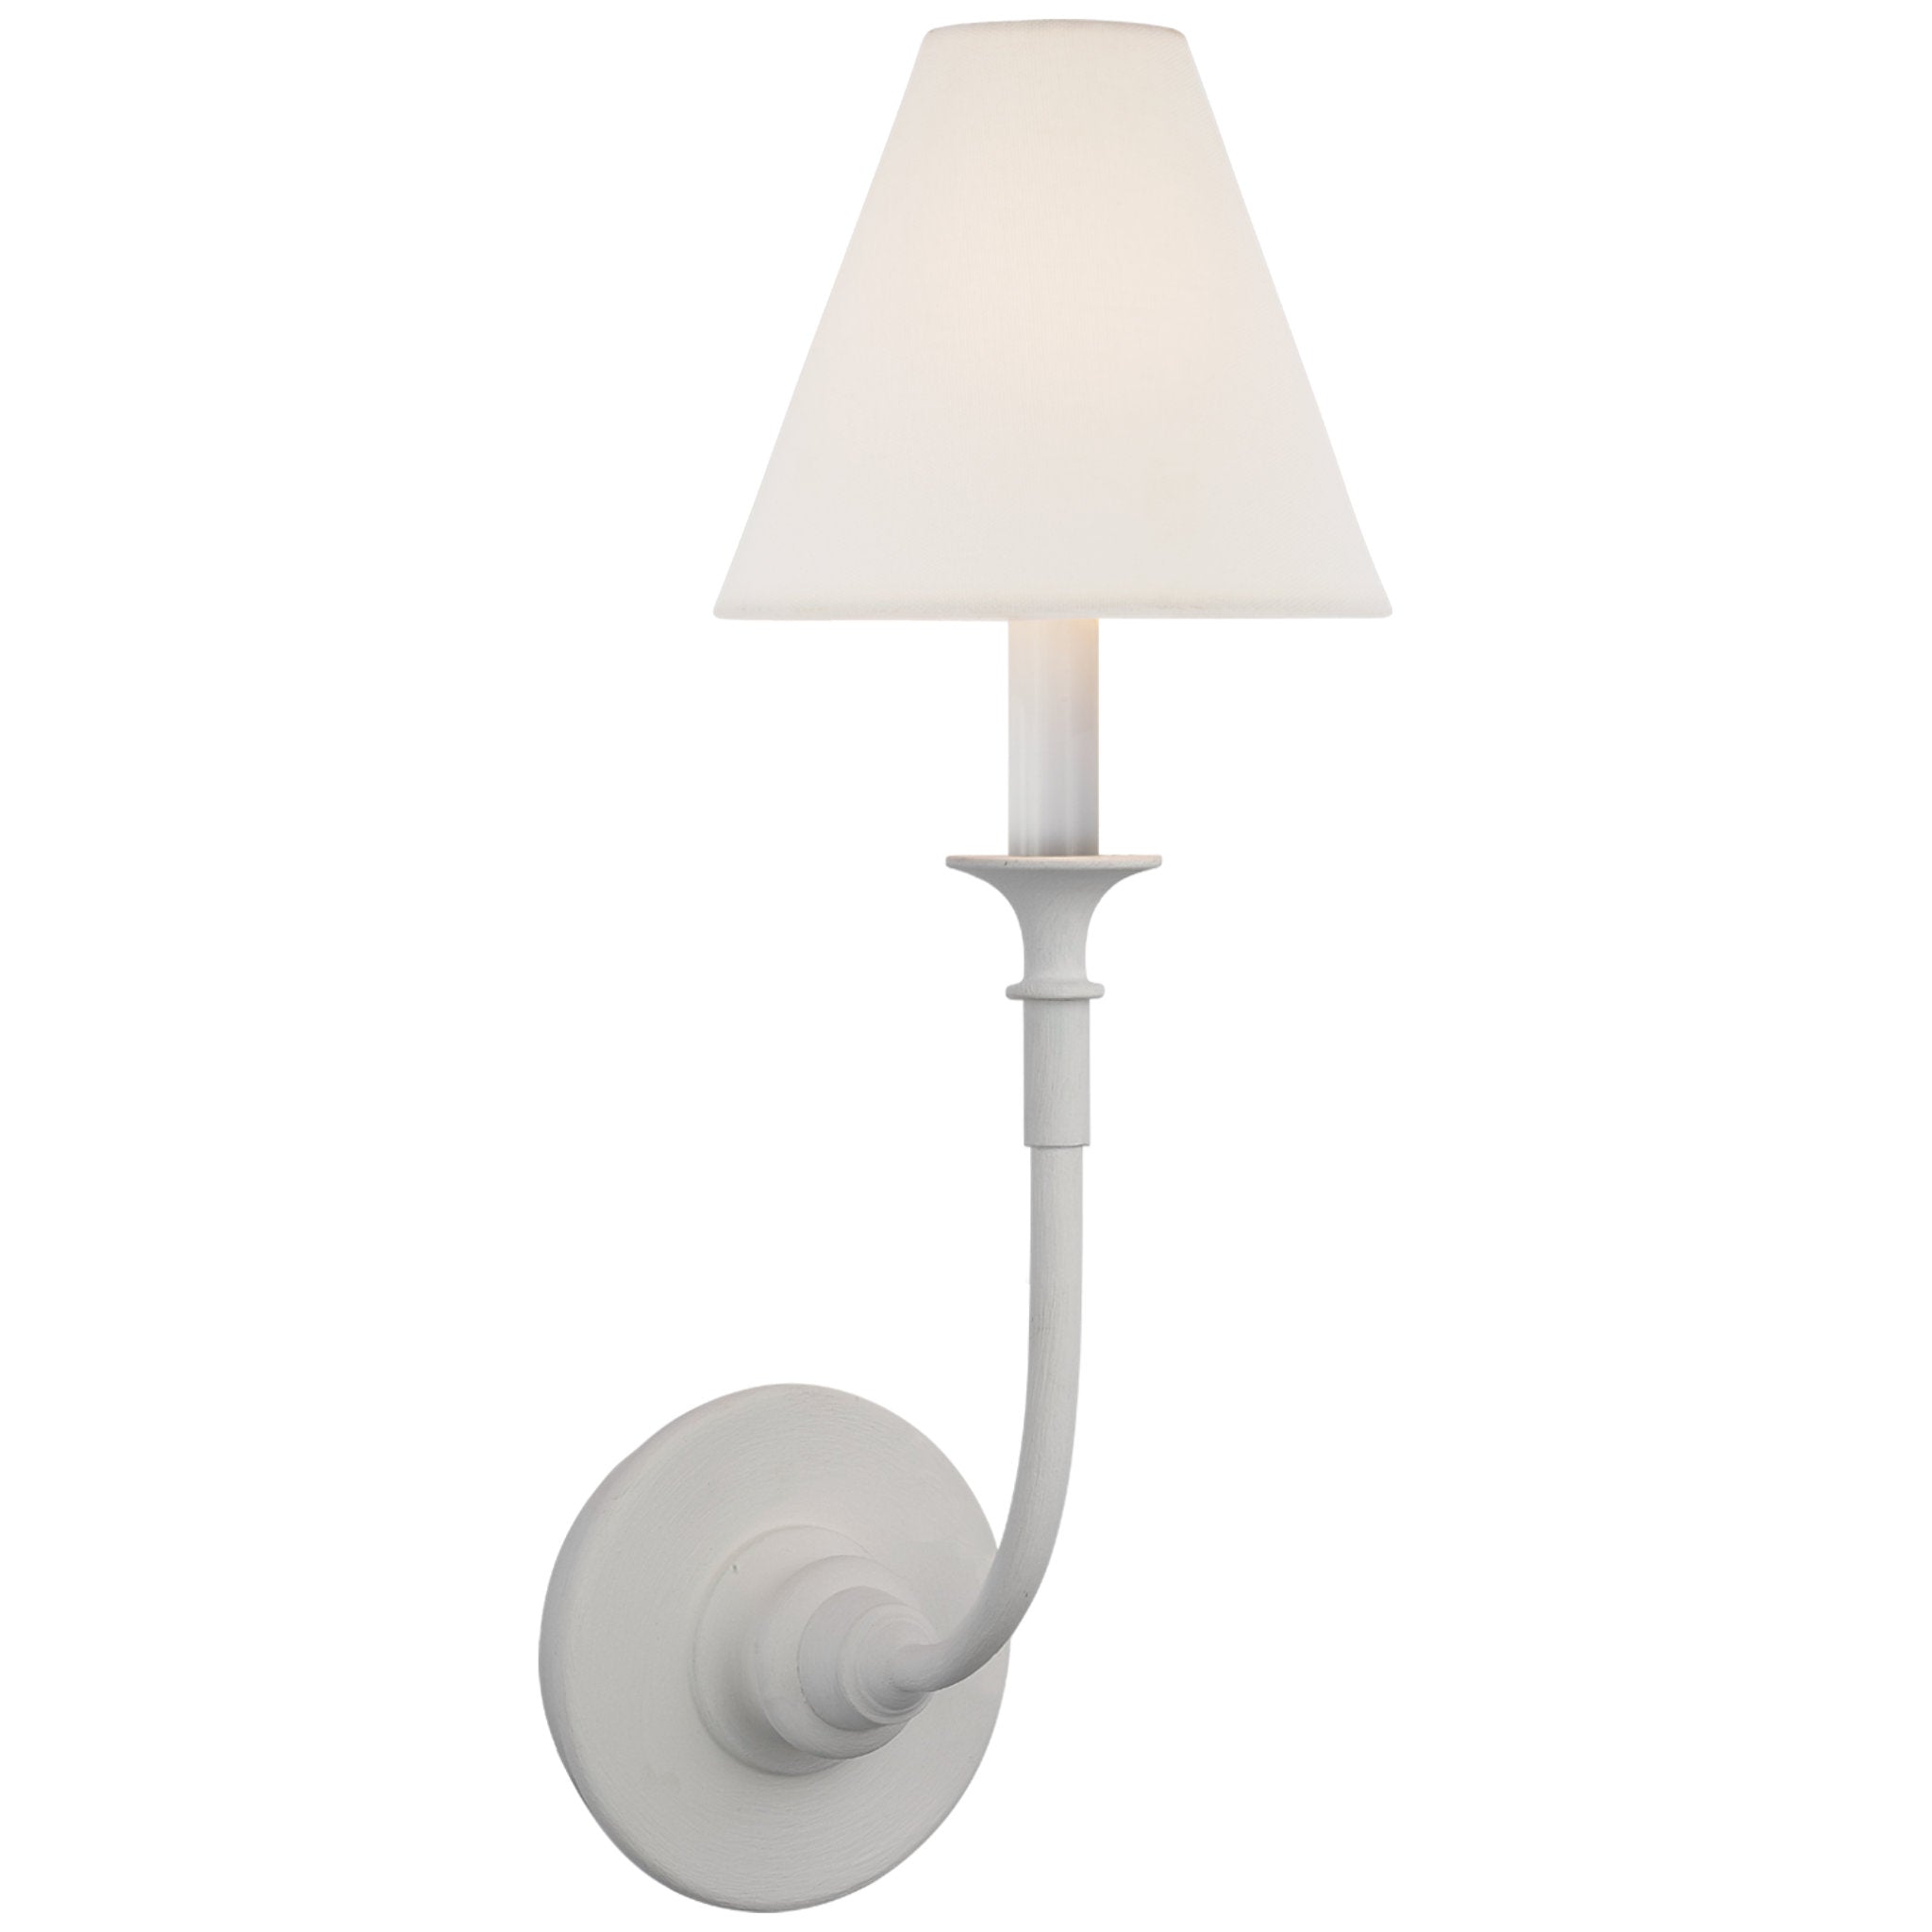 Thomas O'Brien Piaf Single Sconce in Plaster White with Linen Shade